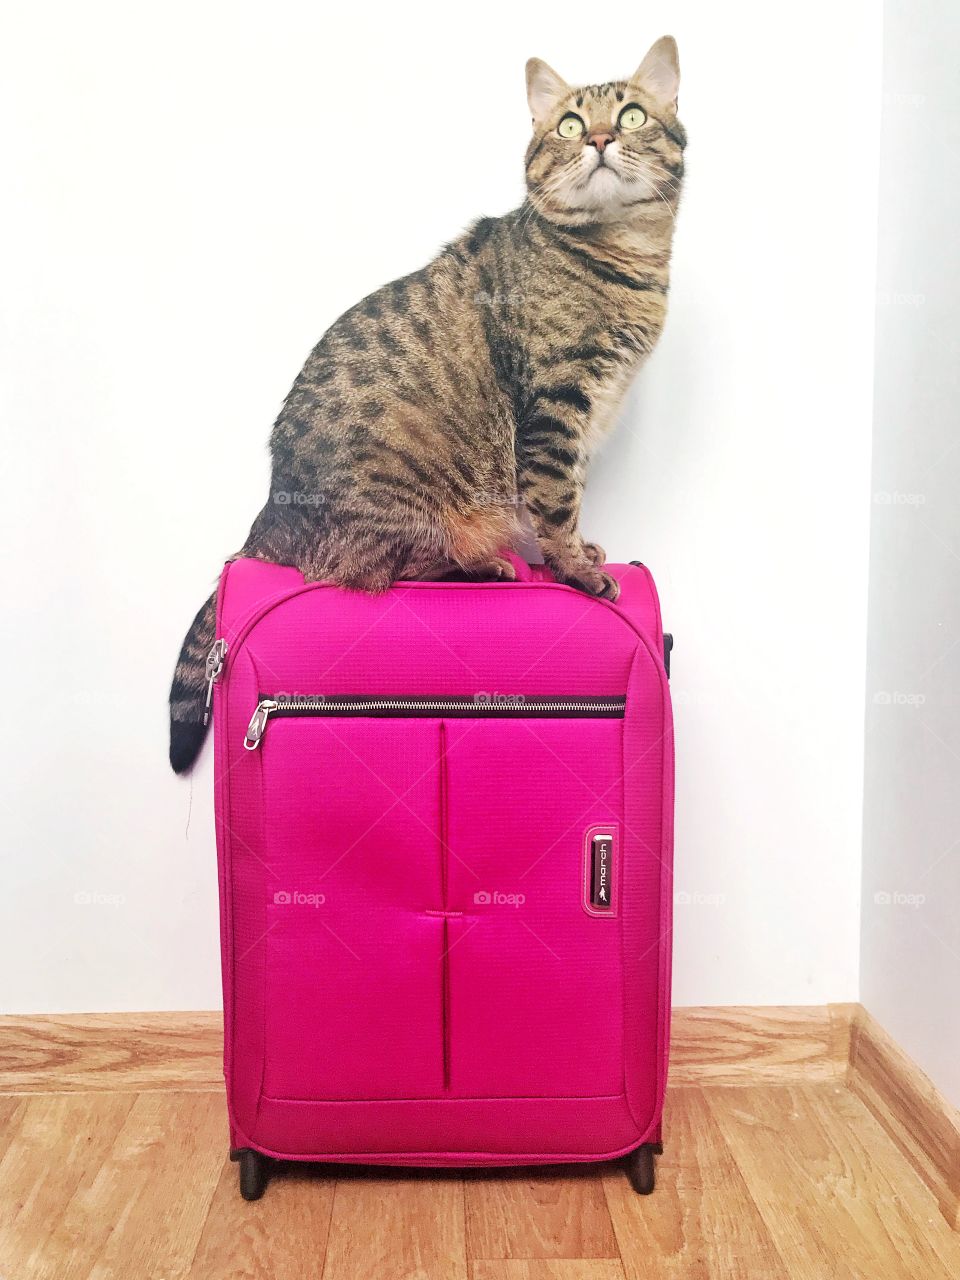 Cute photo cat with suitcase